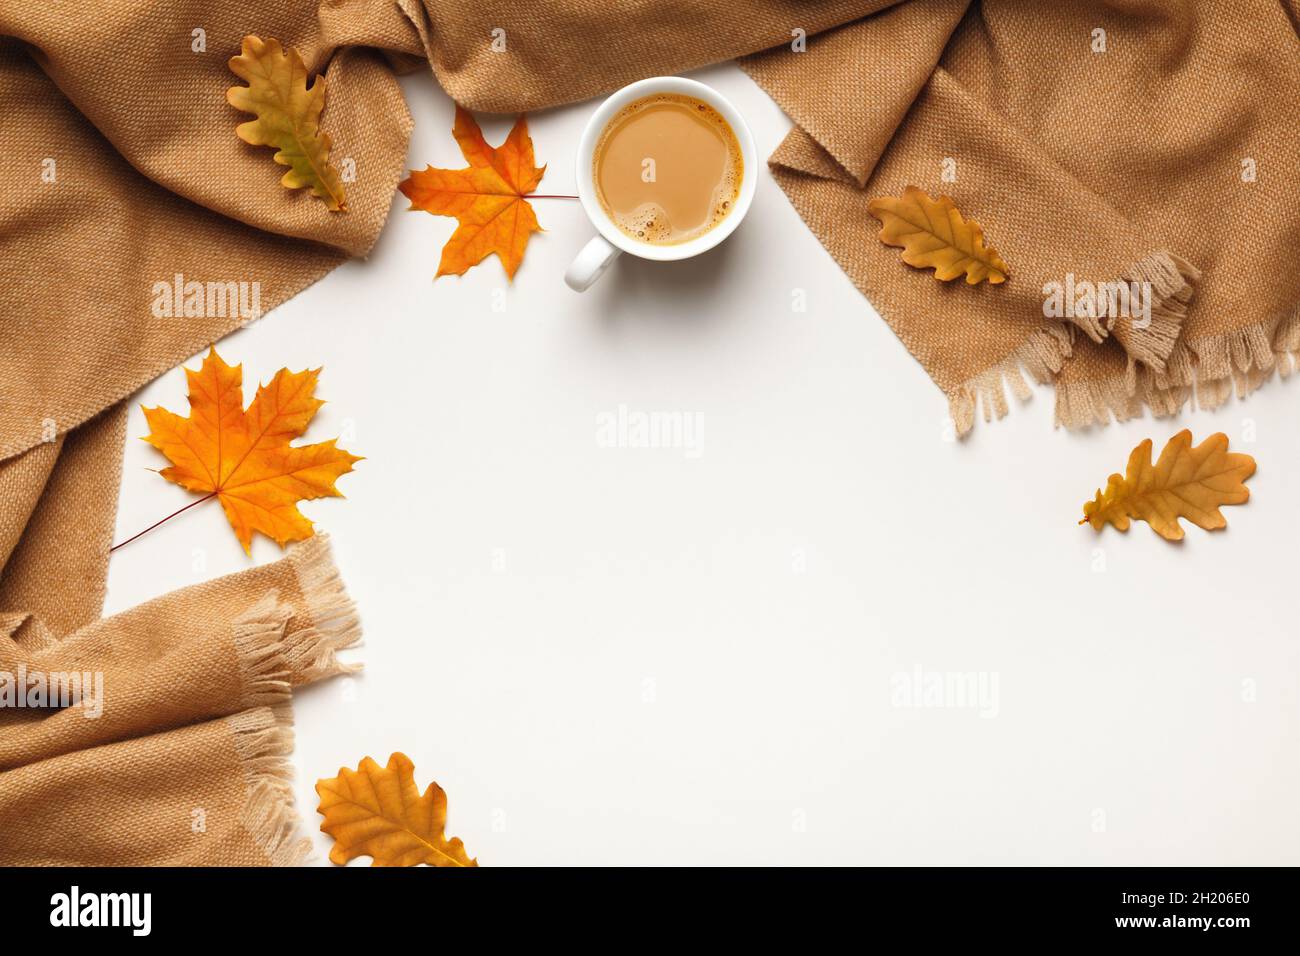 Autumn winter cosiness concept. Beige cashmere scarf coffee cup with fallen oak and maple leaves on a white background. Flat lay top view copy space Stock Photo